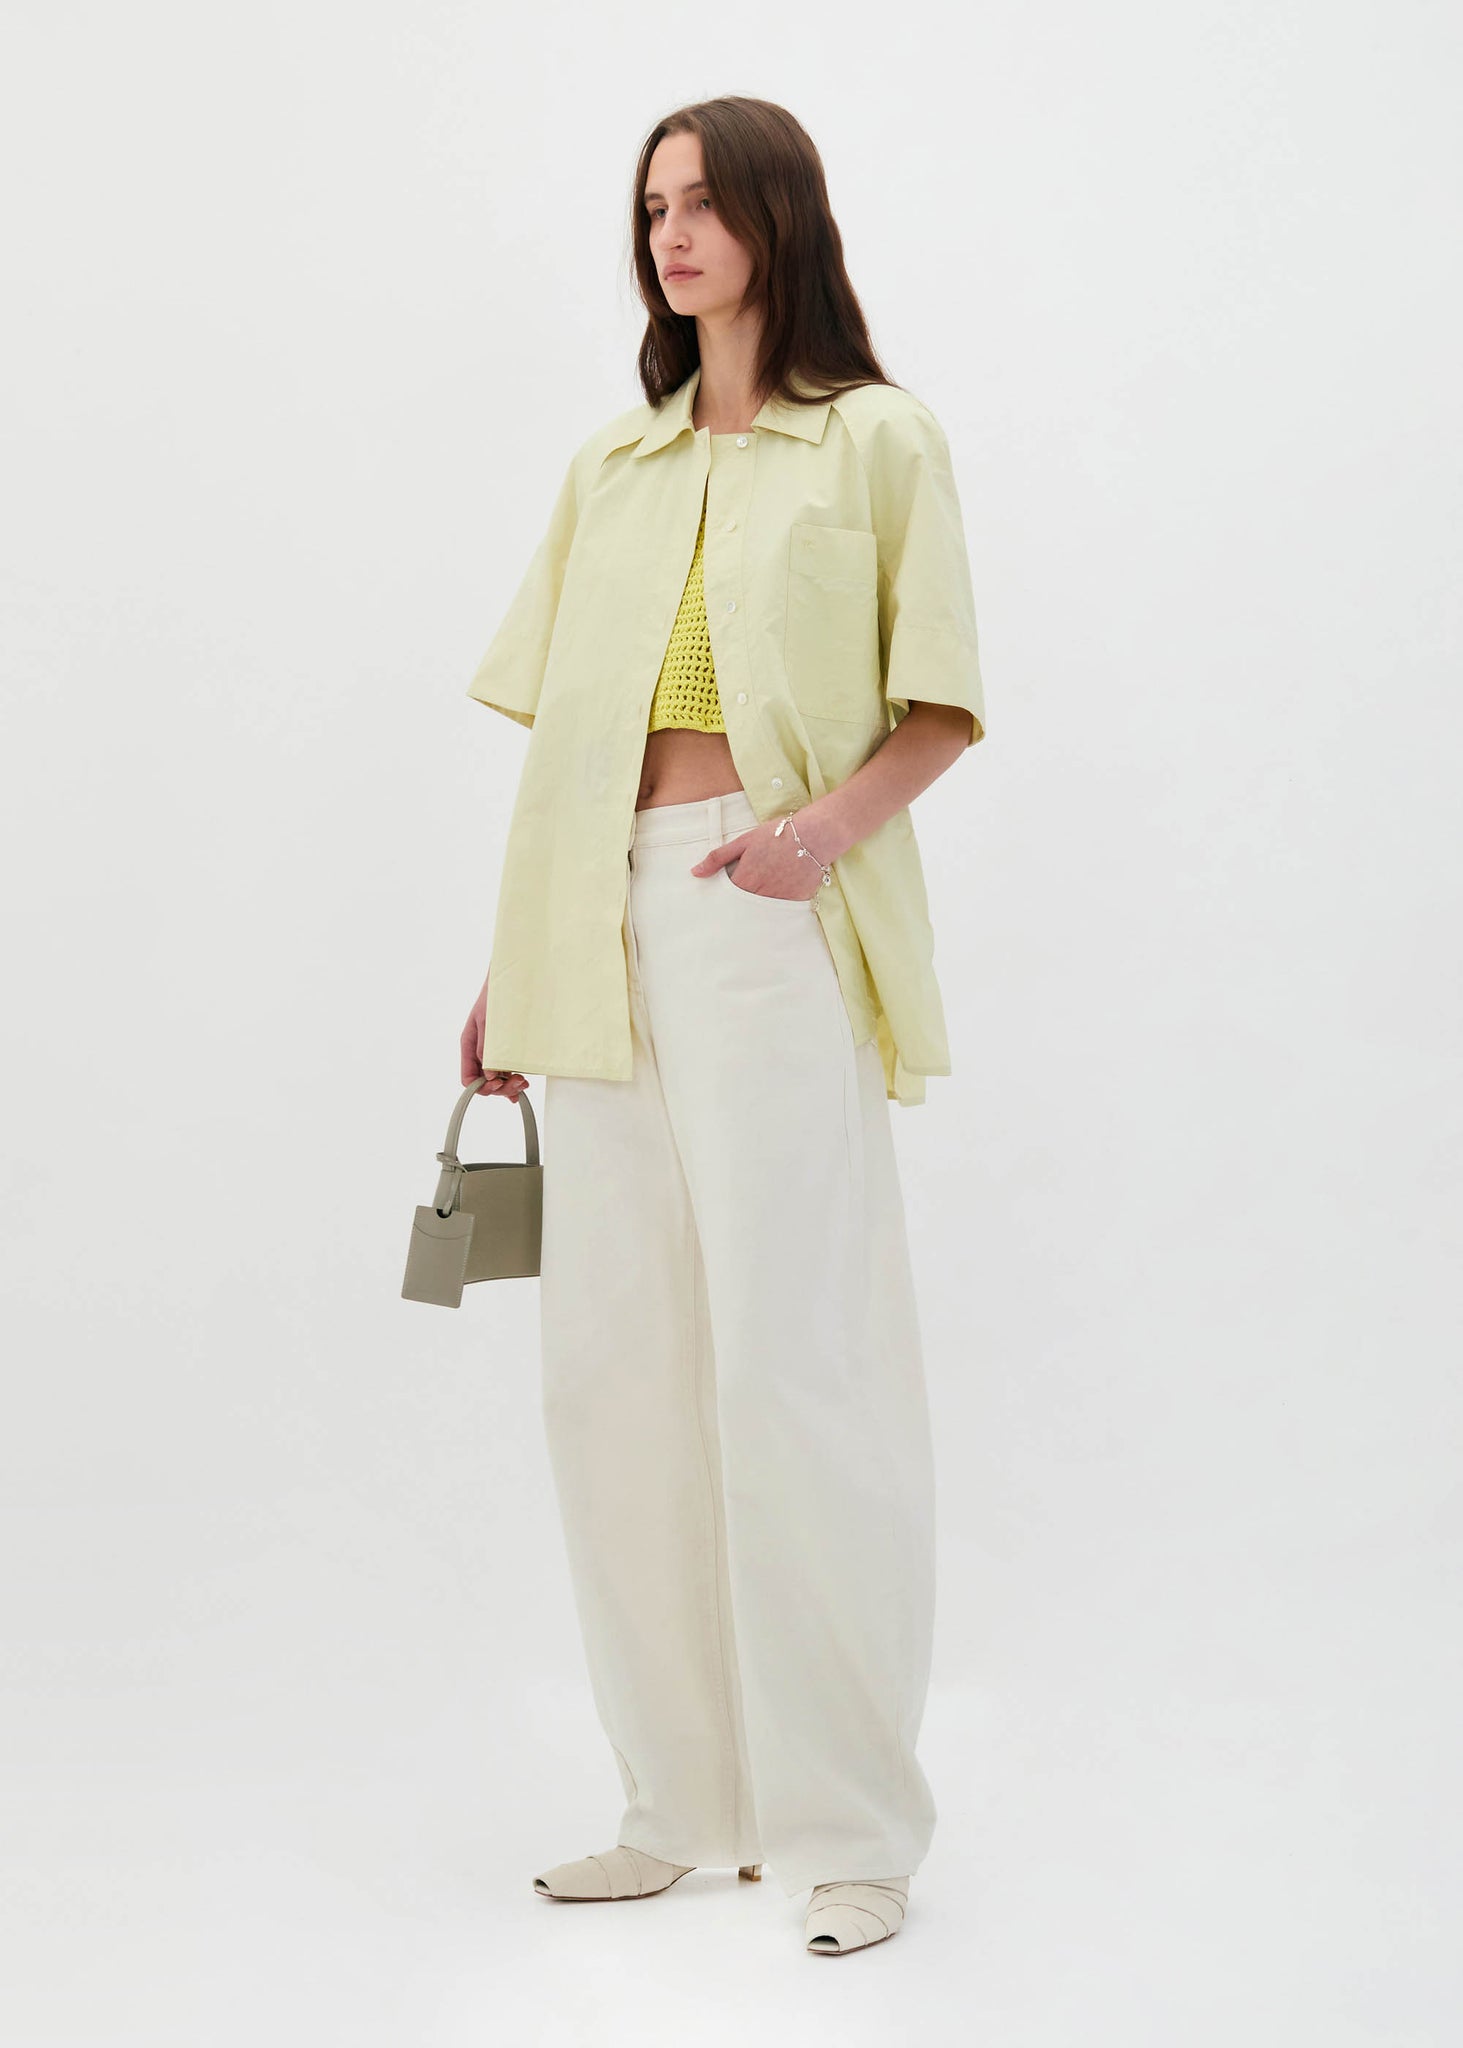 Lime Stitch Pointed Shirt - 157Moments